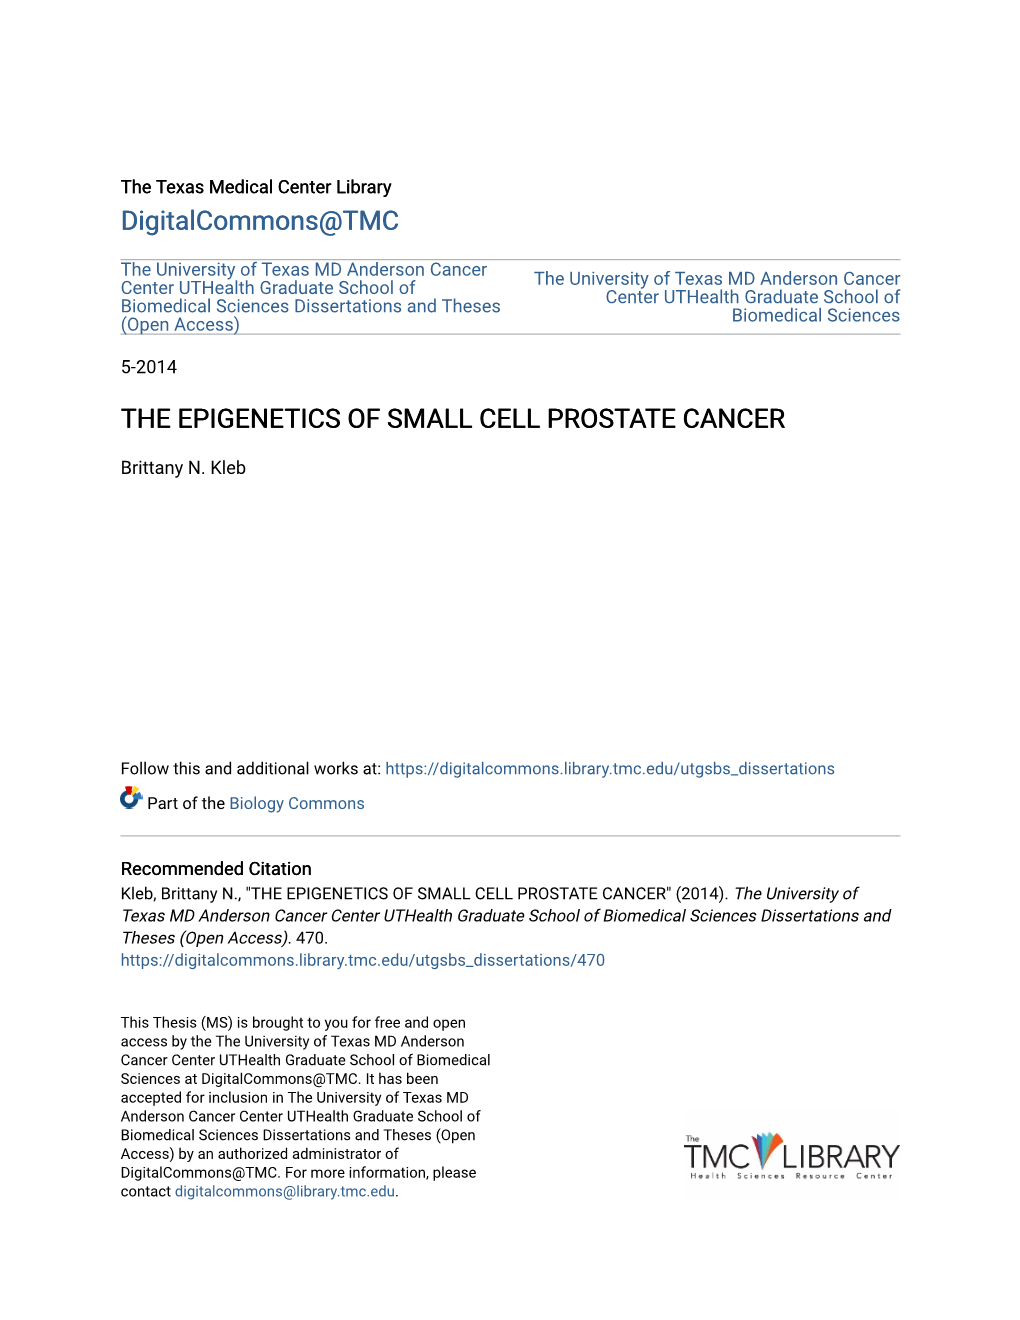 The Epigenetics of Small Cell Prostate Cancer